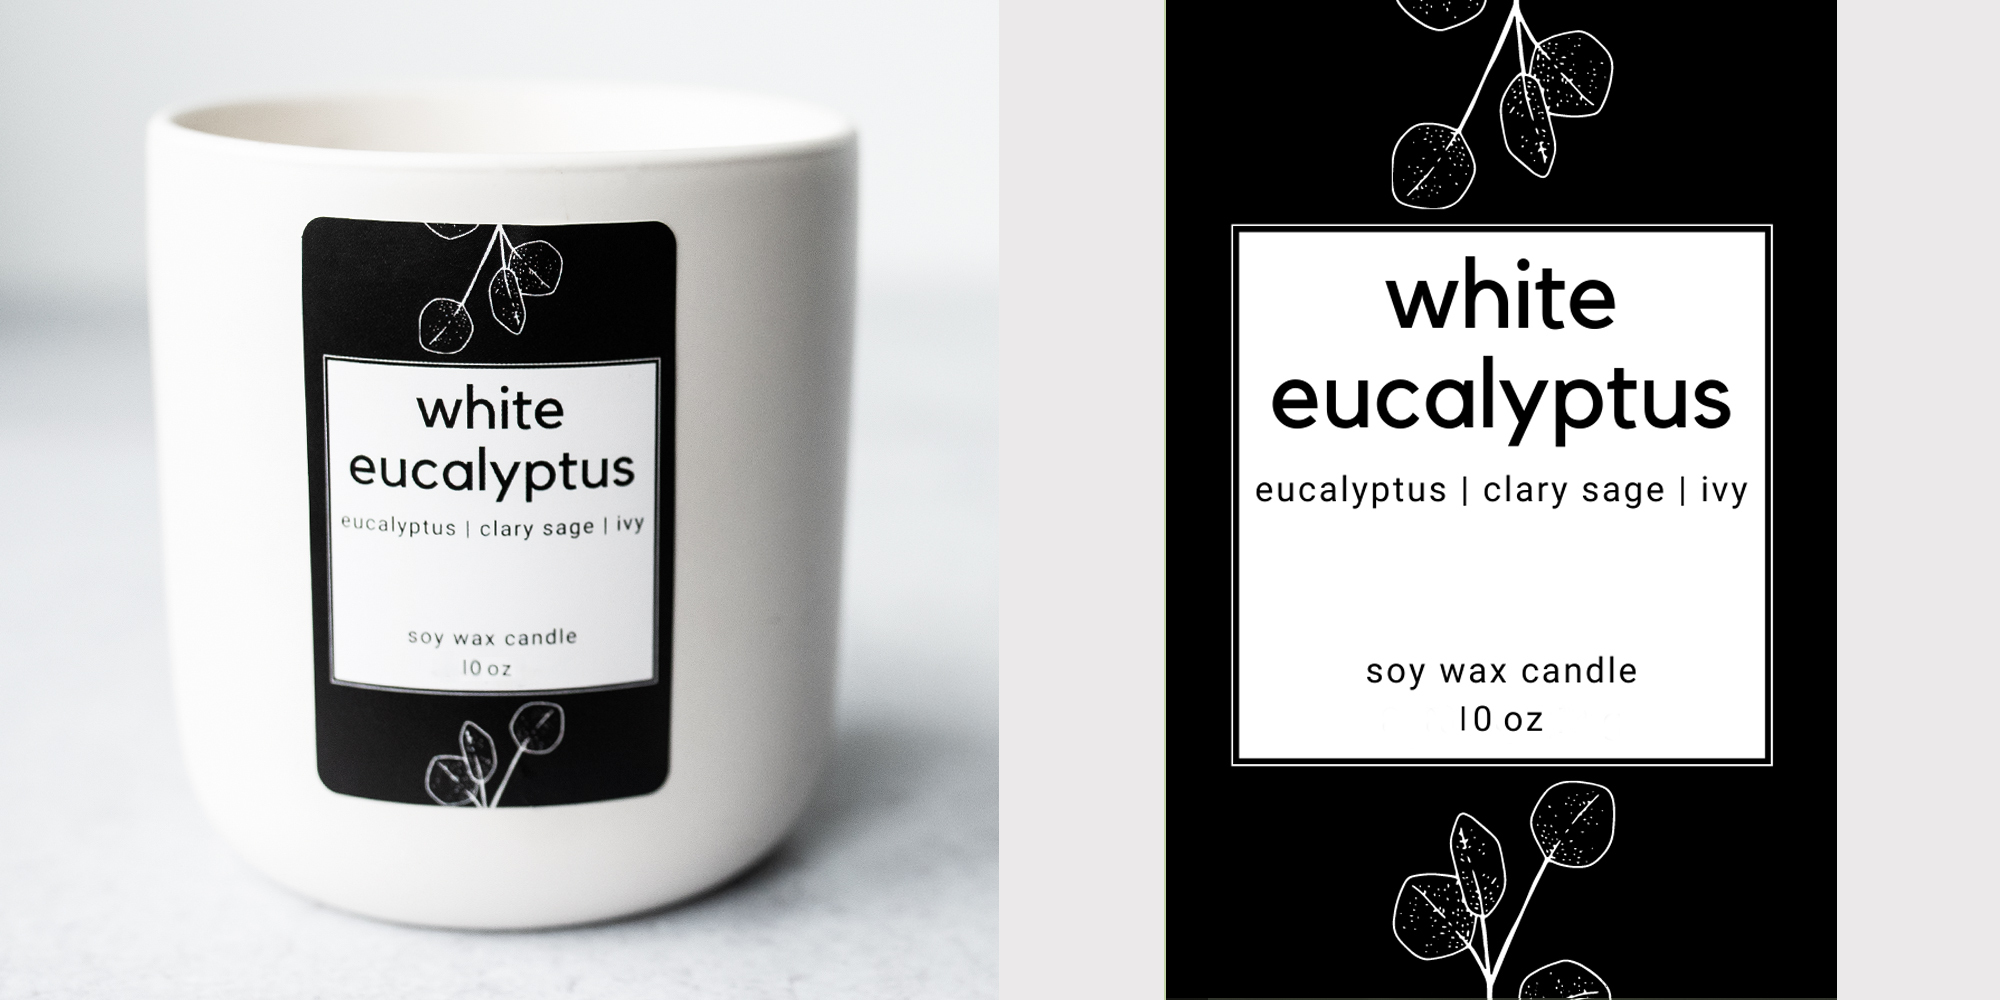 White eucalyptus fragrance oil candle and label.